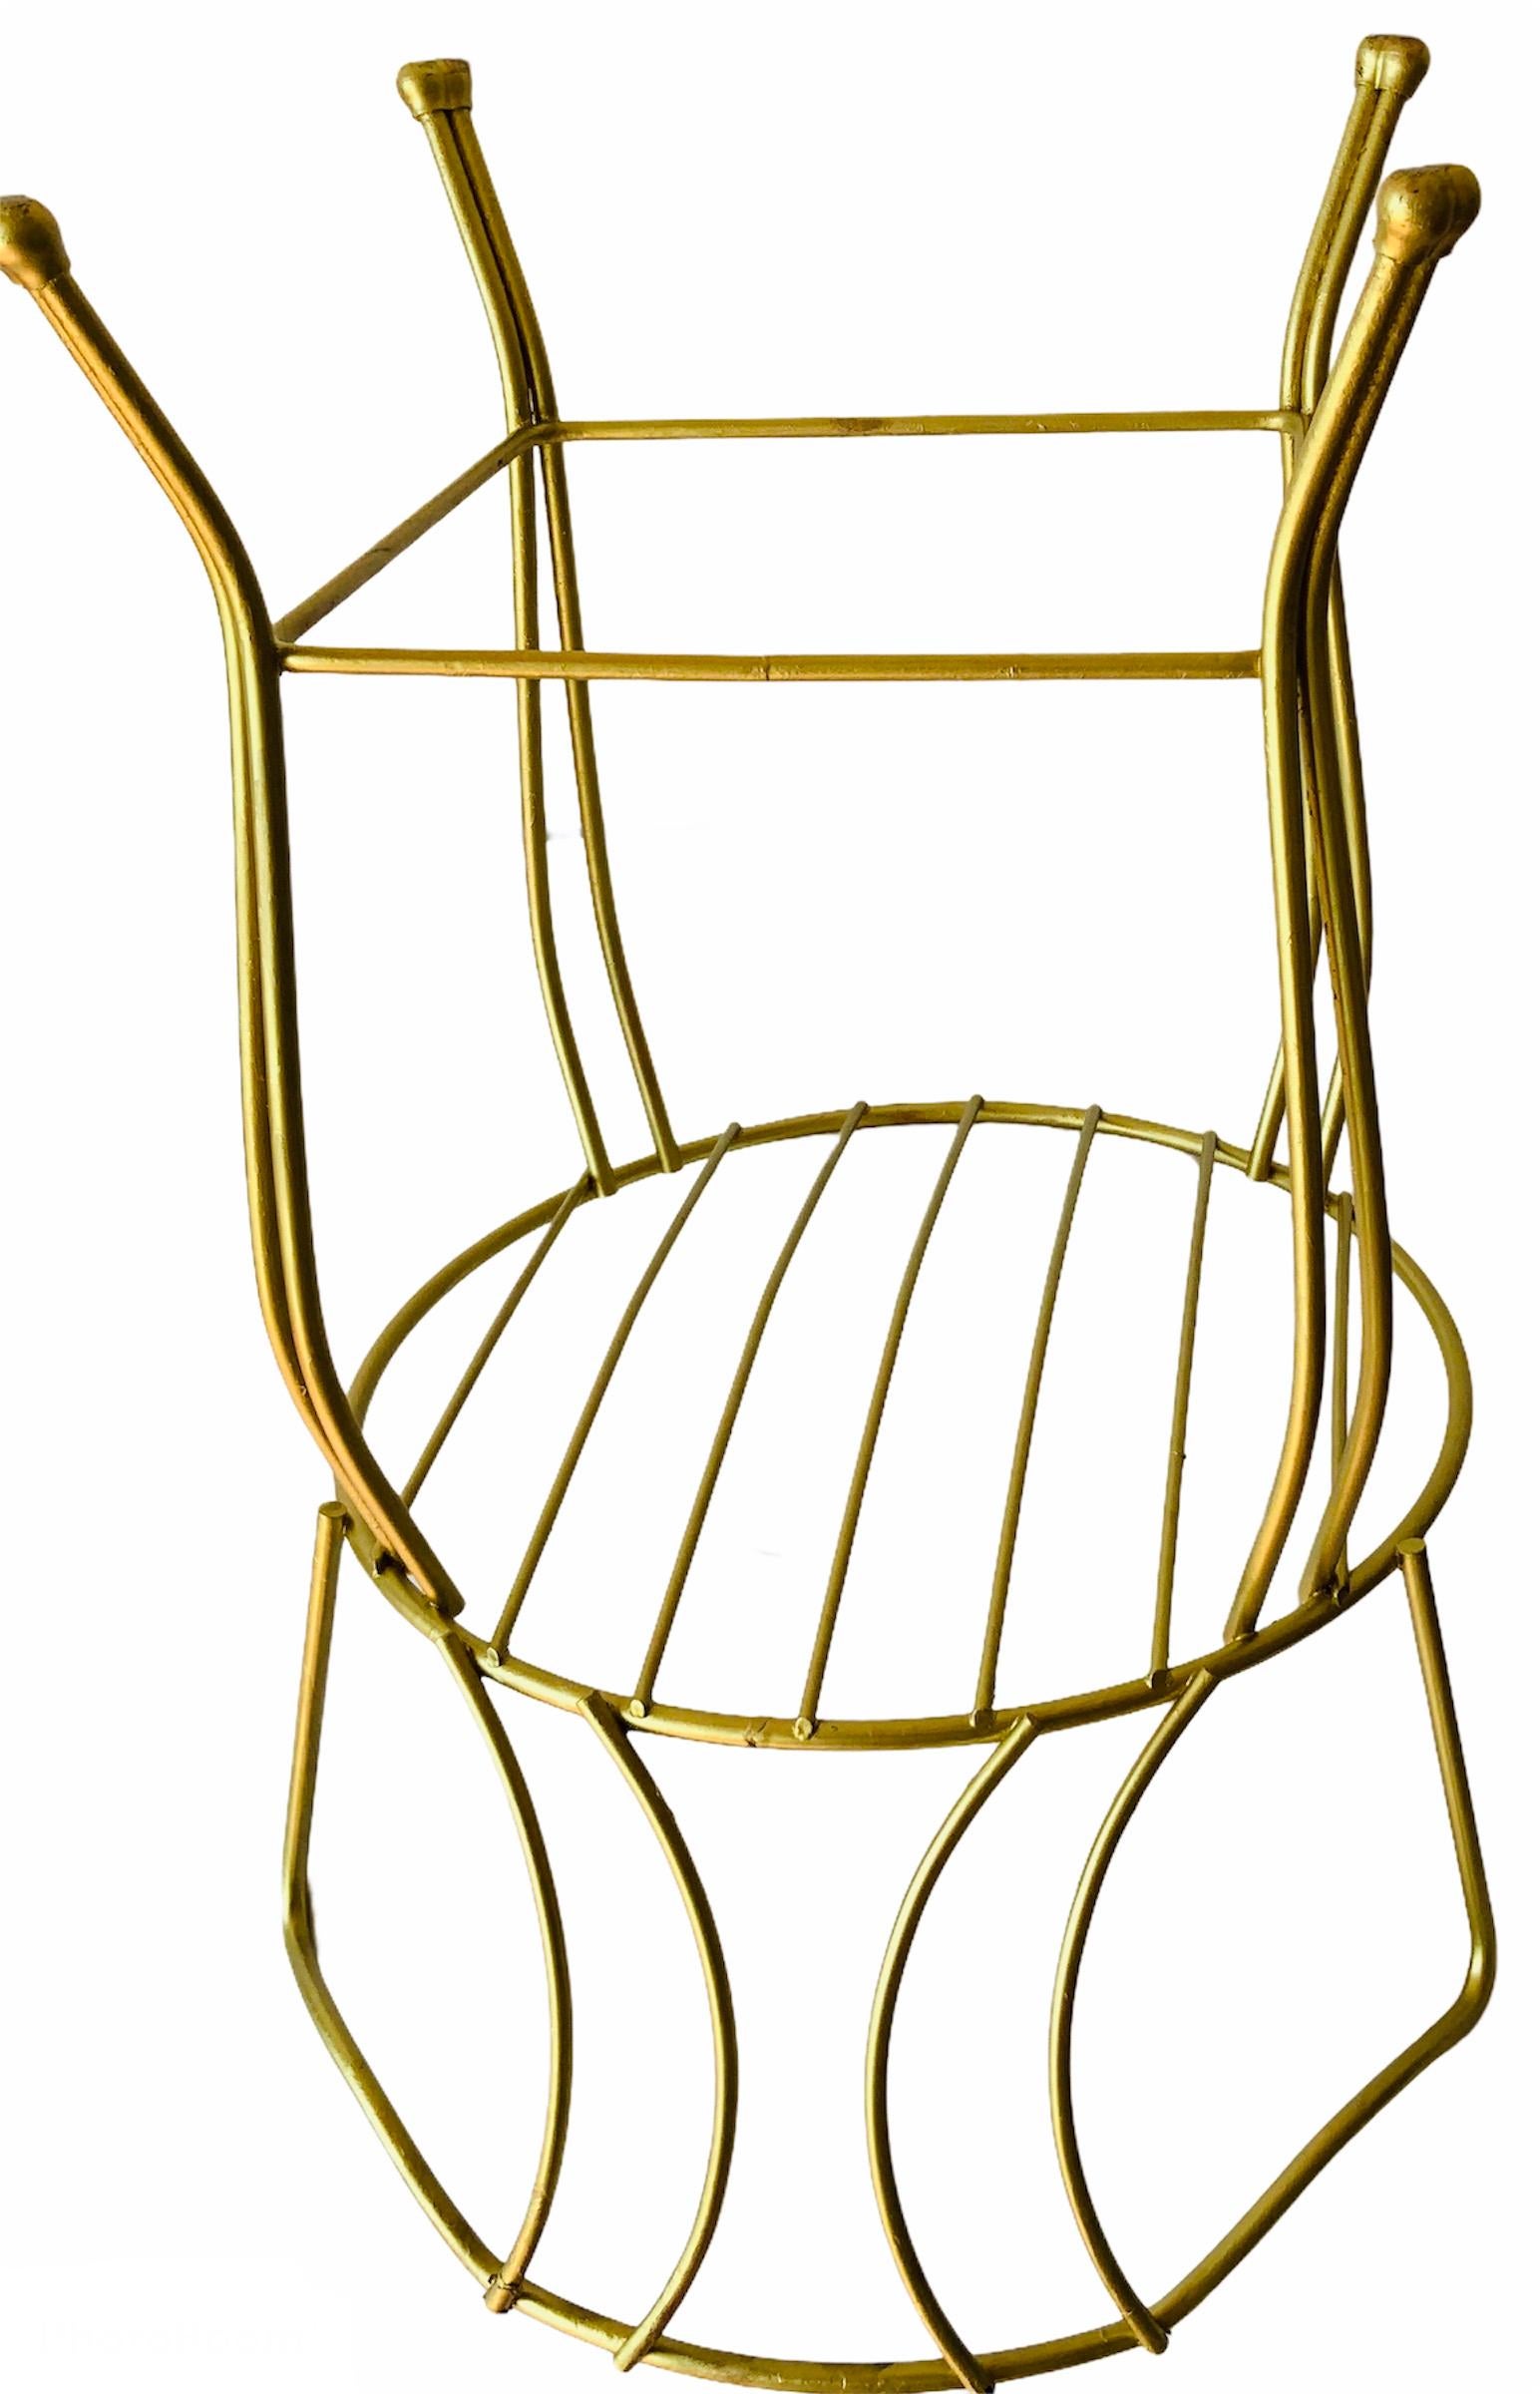 This a gold painted metal vanity round seat chair/stool with back support. The chair has four pairs of serpentine legs.